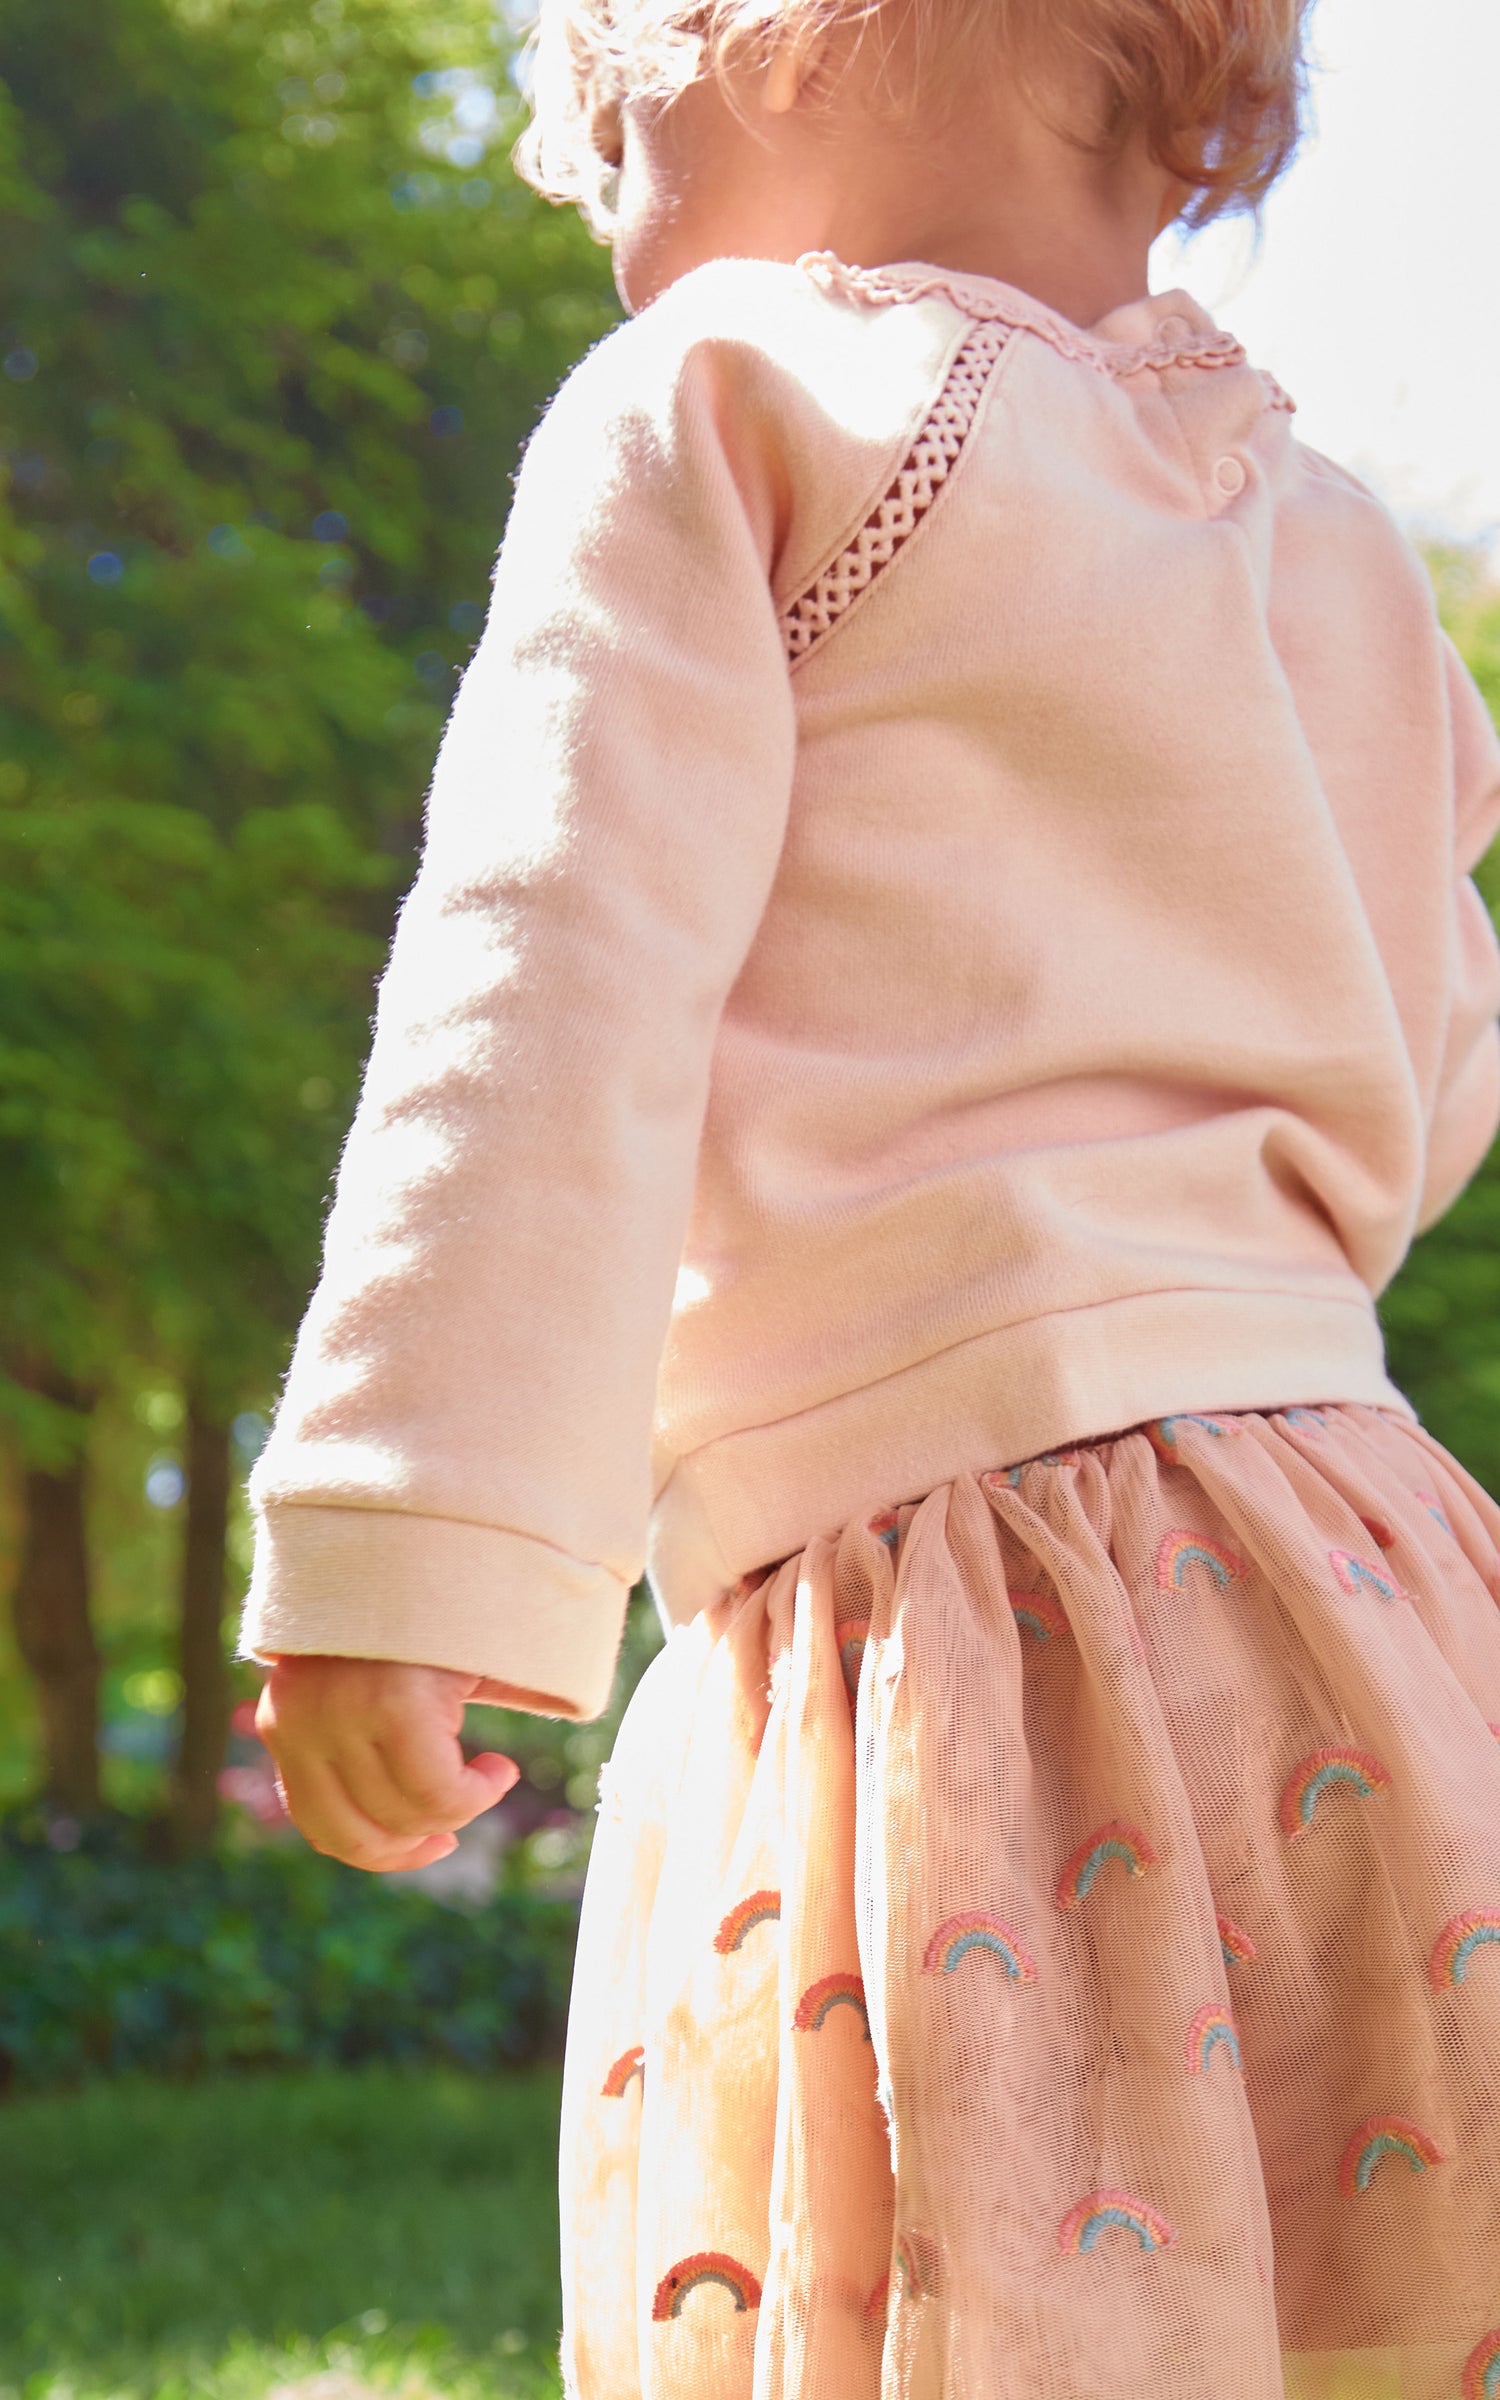 Back view of child running outside with pink sweatshirt and tulle skirt set with "shine like the sun" wording  